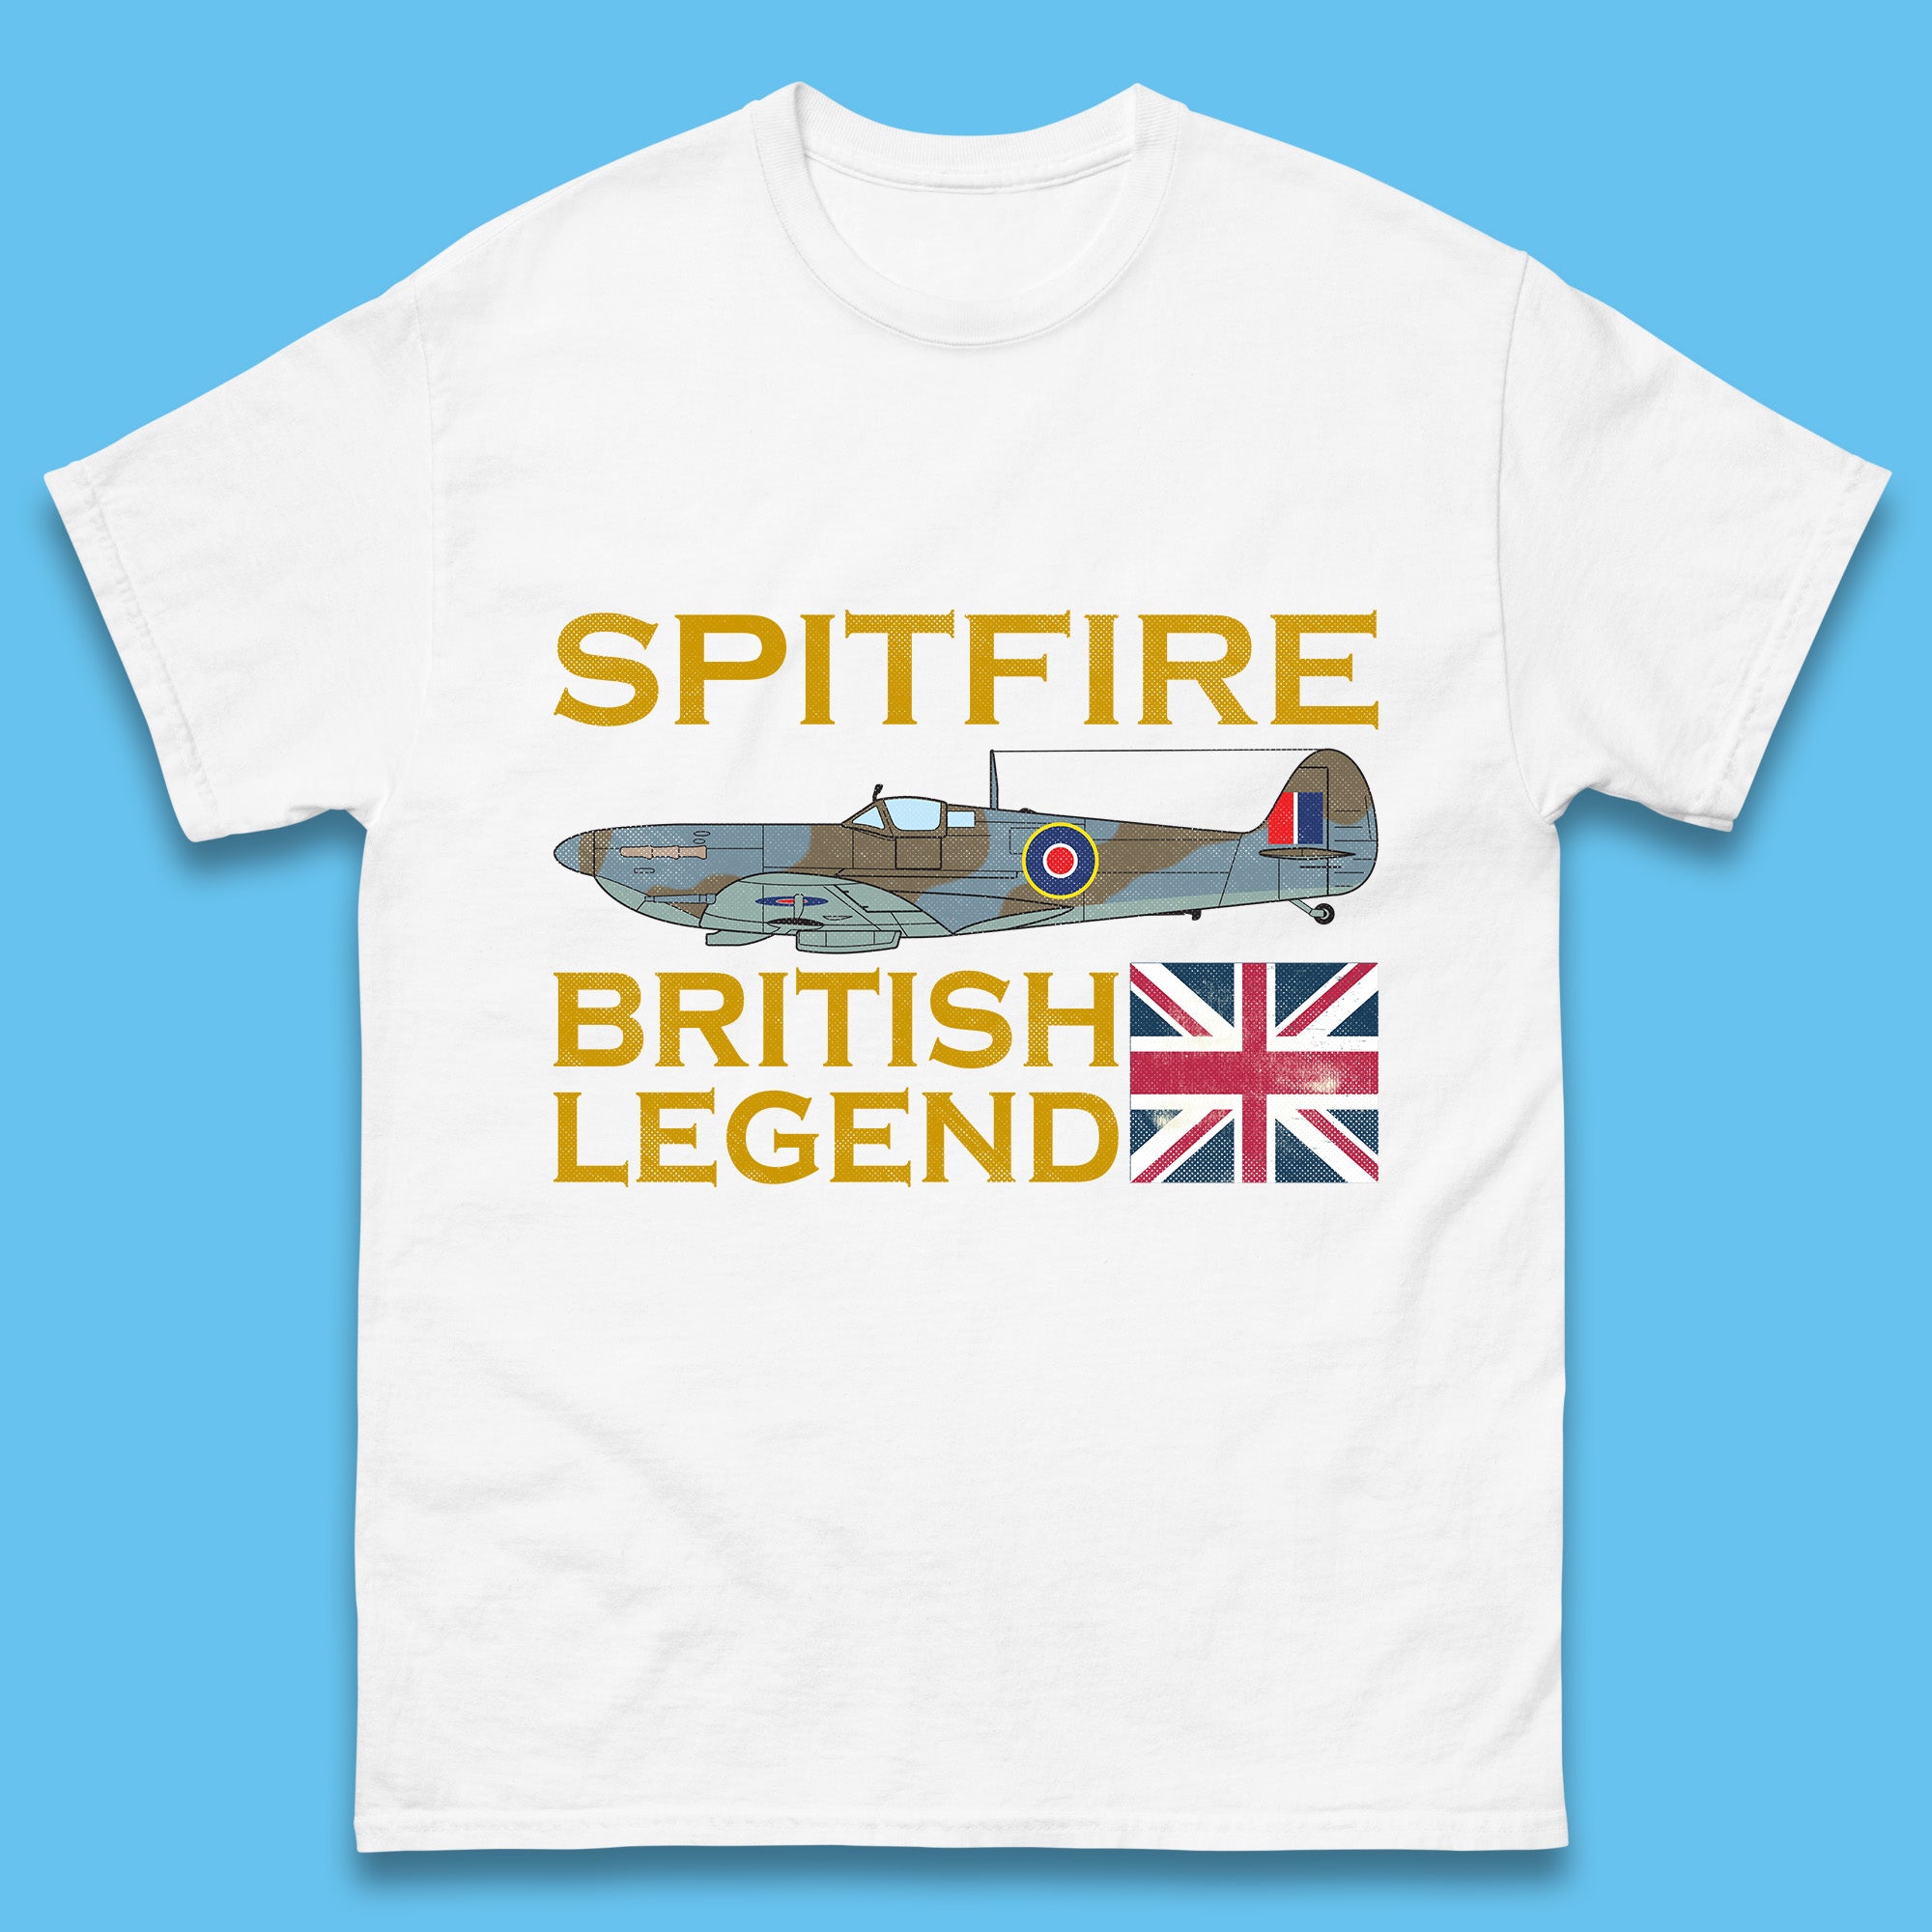 Supermarine Spitfire British Legend Fighter Aircraft Royal Air Force Spitfire WW2 Remembrance Day Mens Tee Top